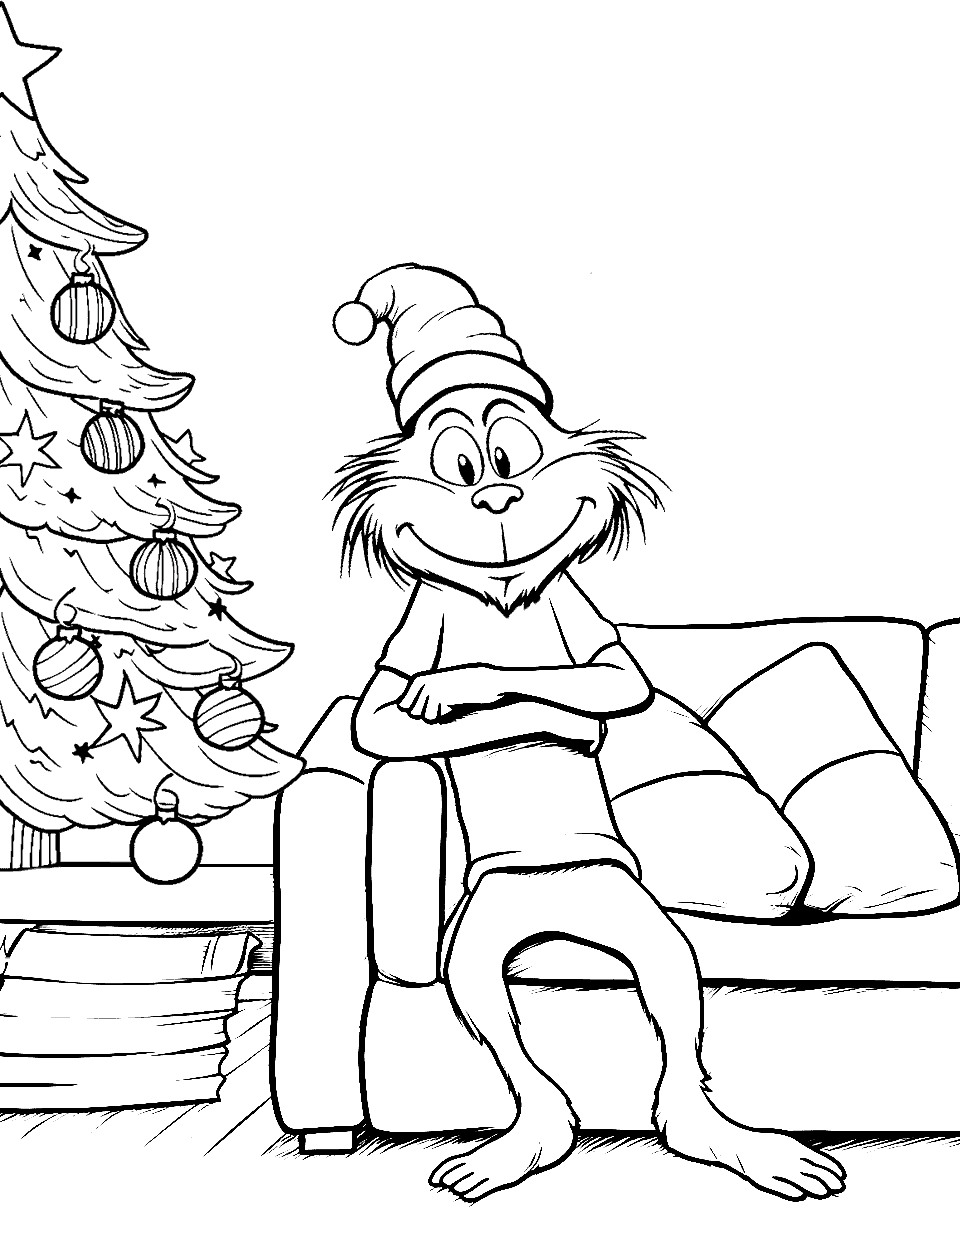 Christmas Morning Grinch Coloring Page - The Grinch is sitting on a couch casually on Christmas morning.